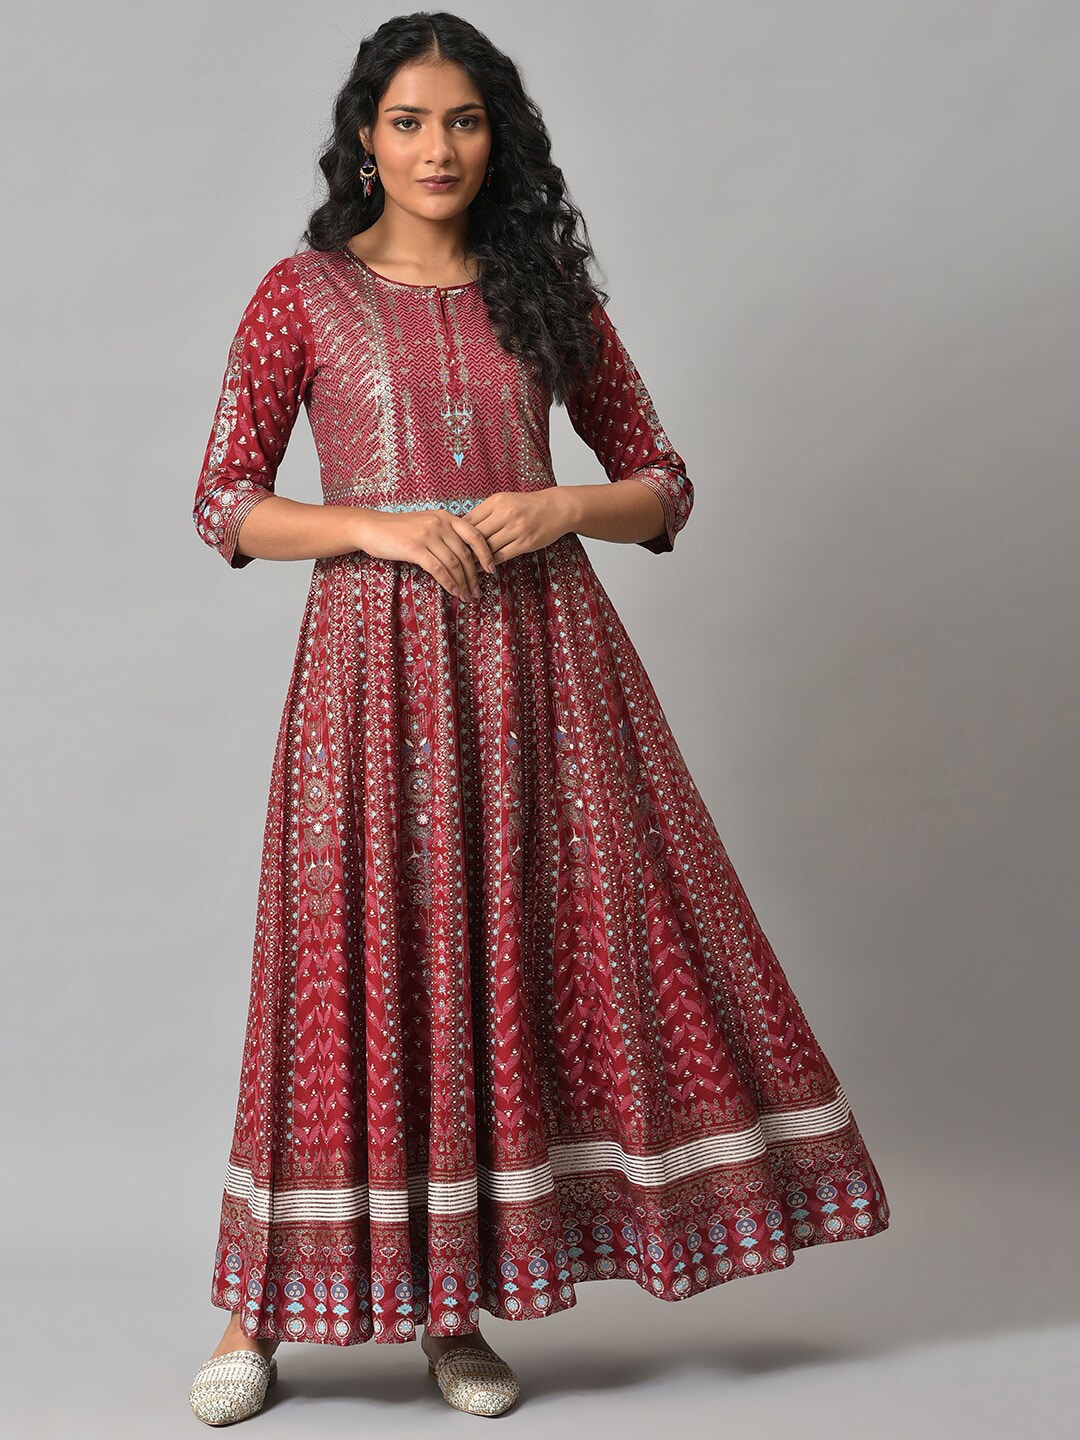 W Red Ethnic Motifs Keyhole Neck Ethnic Maxi Dress Price in India